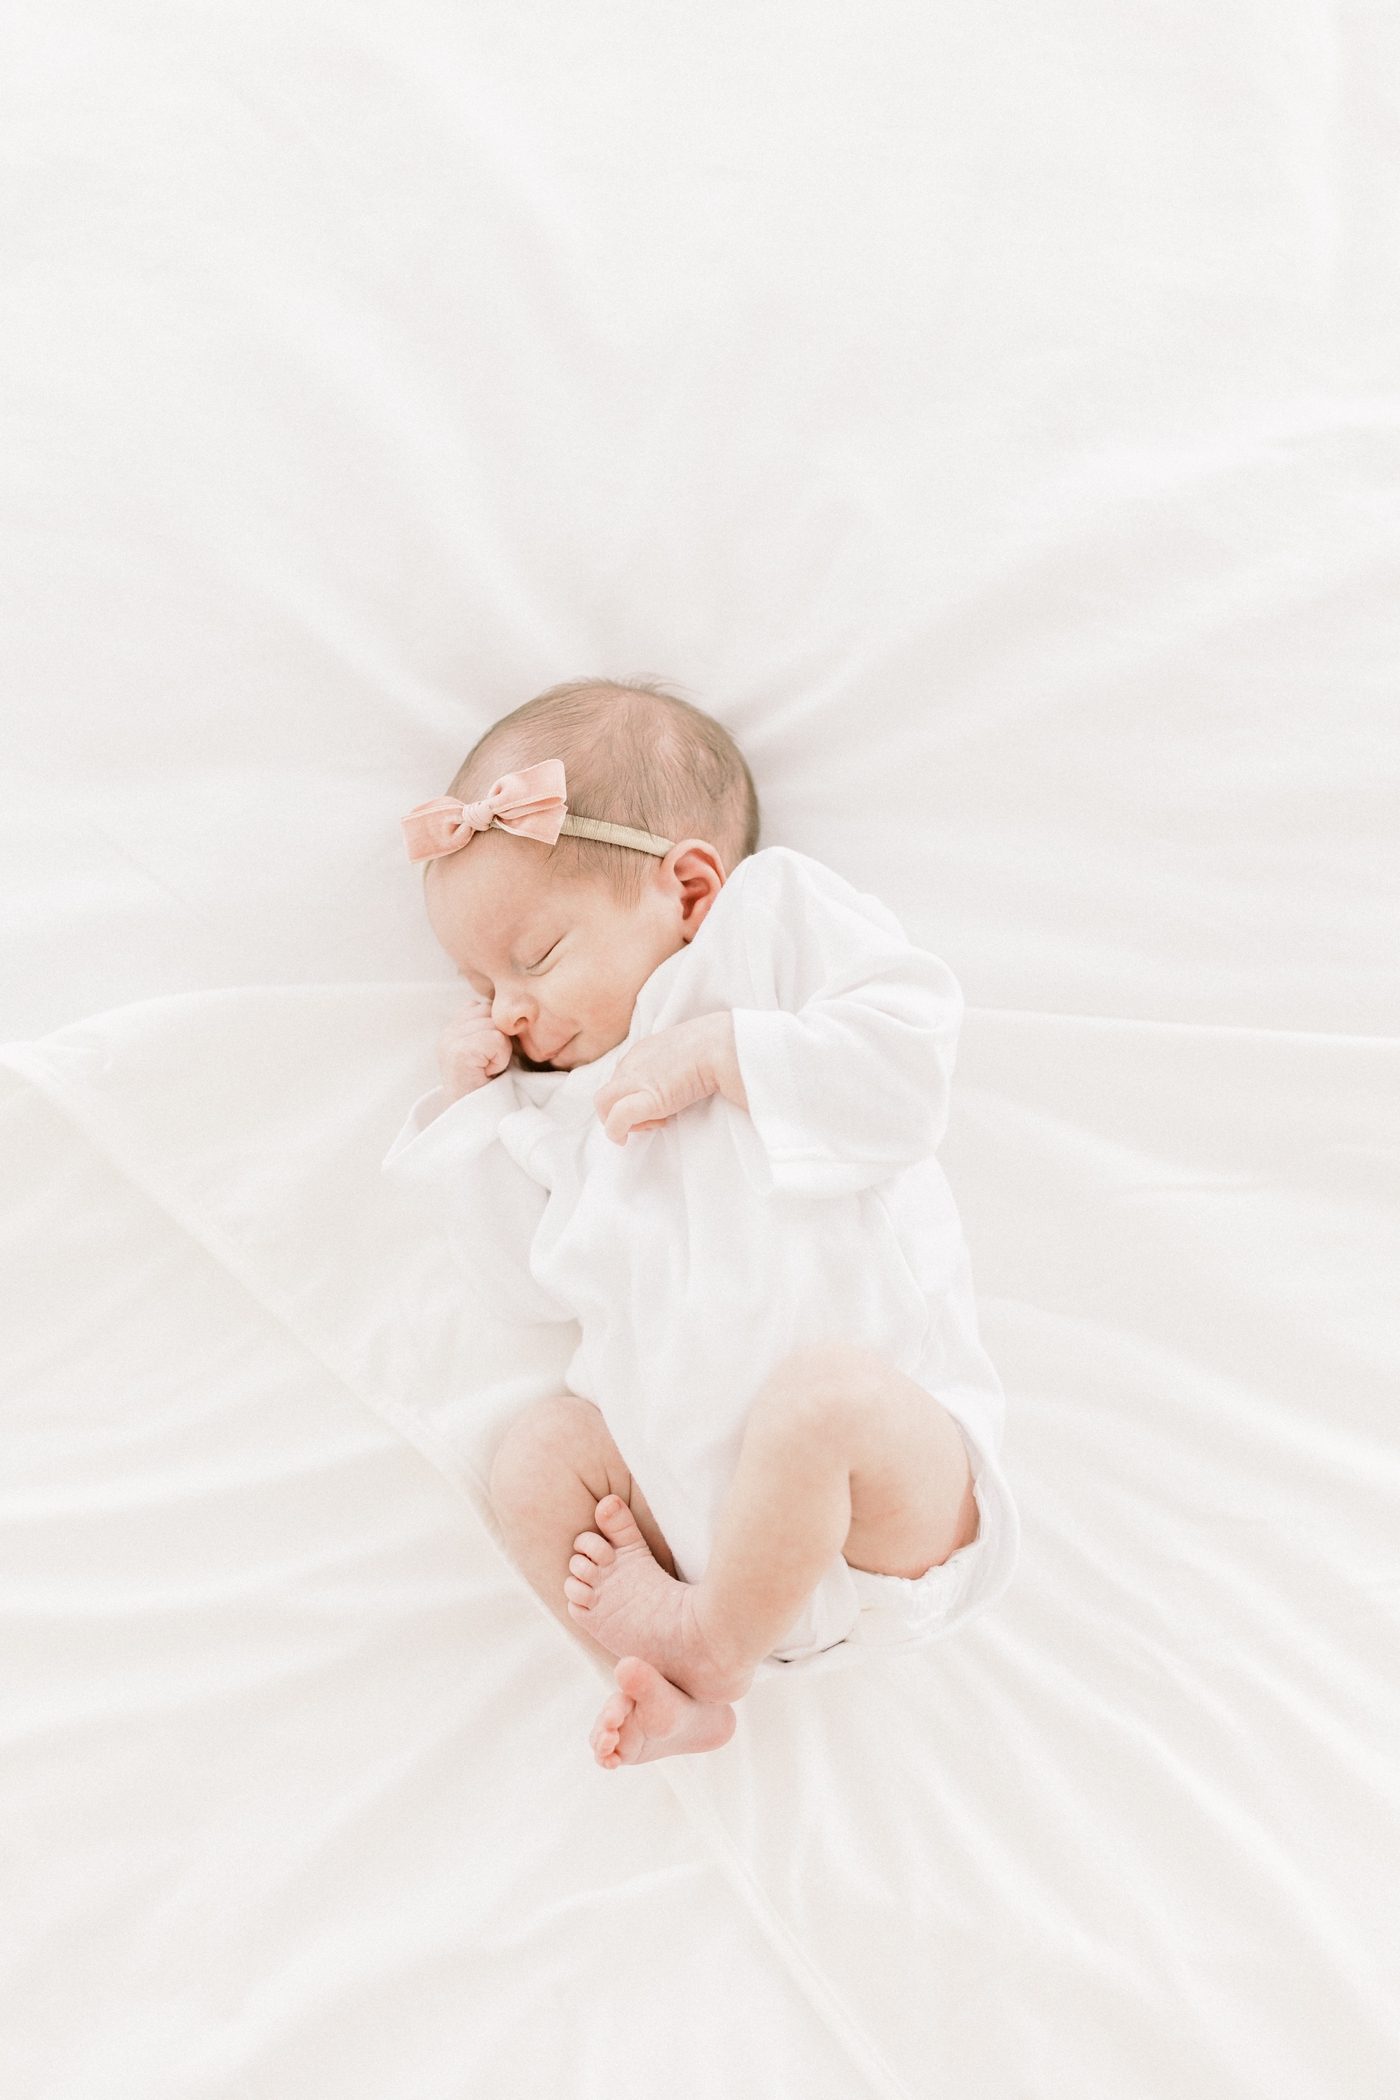 Newborn baby in white onesie wearing a pink bow | Photo by Caitlyn Motycka Photography.